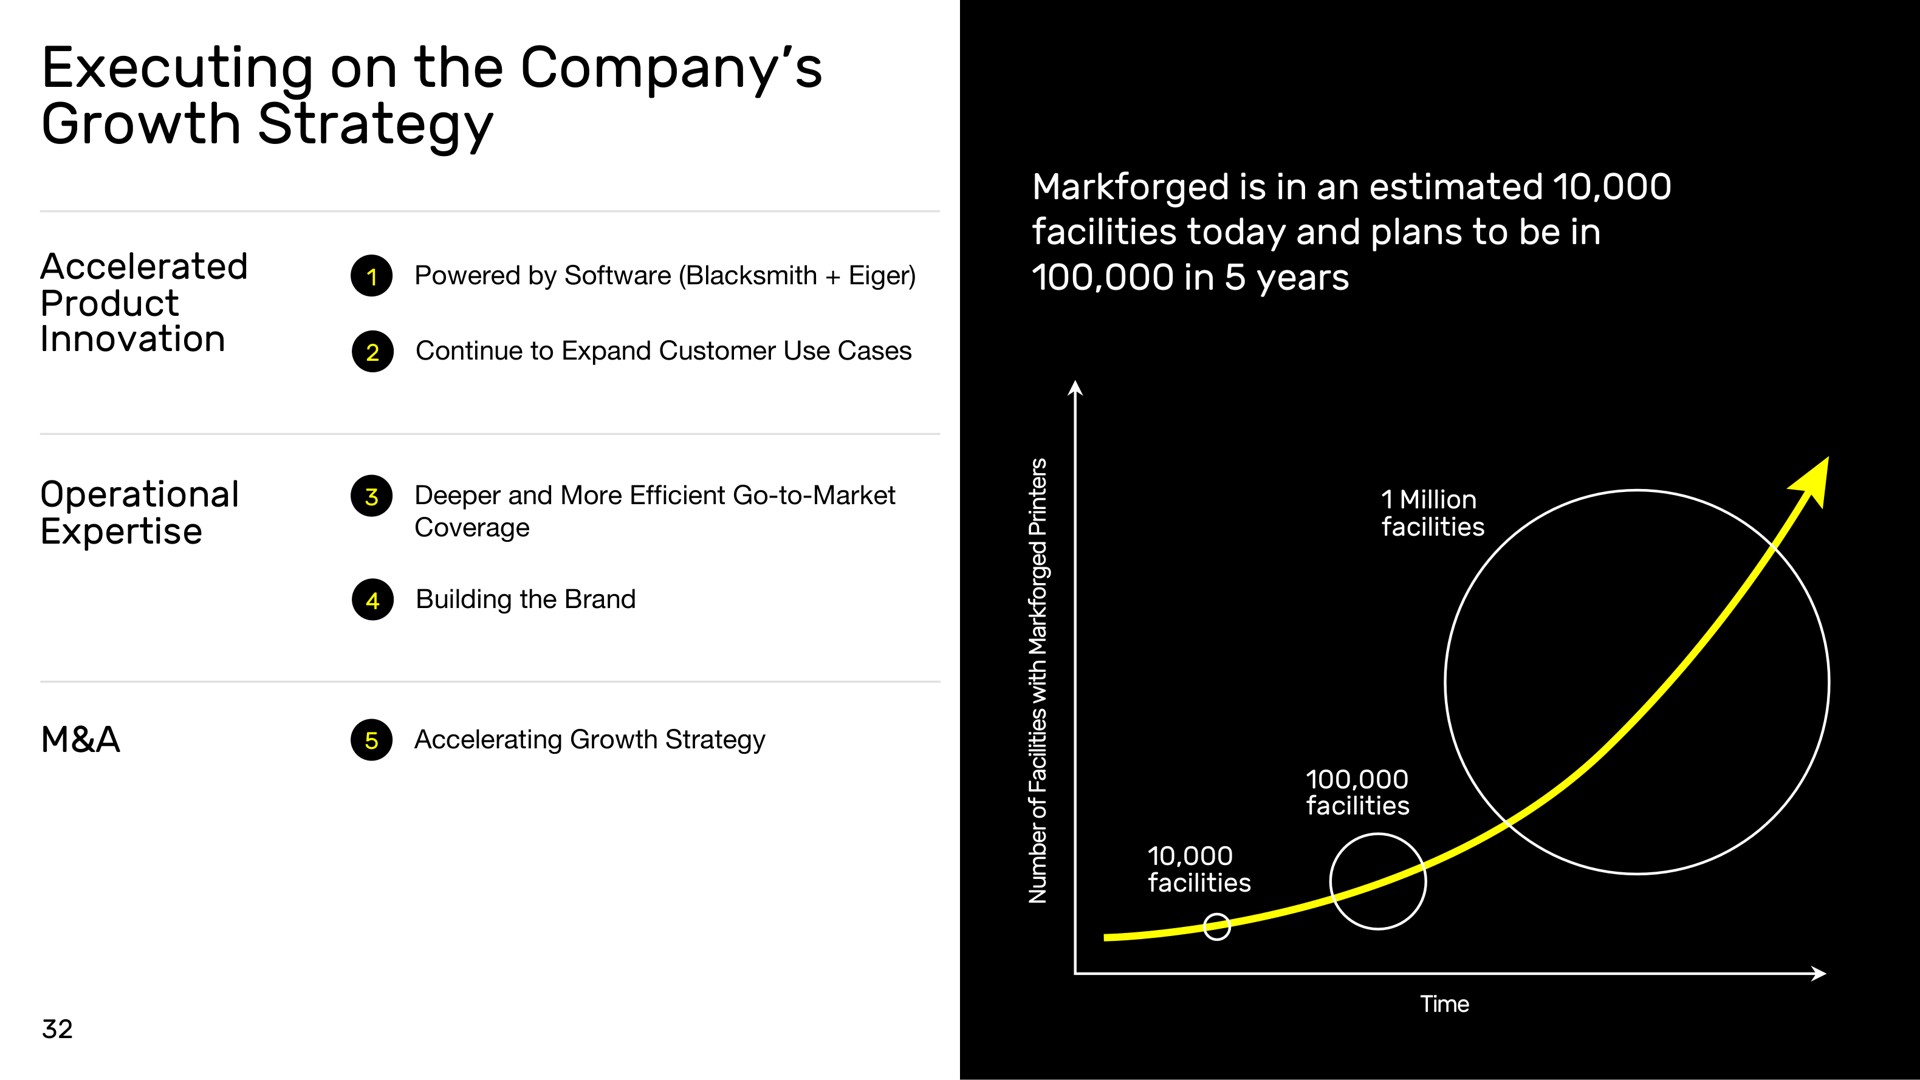 executing on the company growth strategy | Markforged